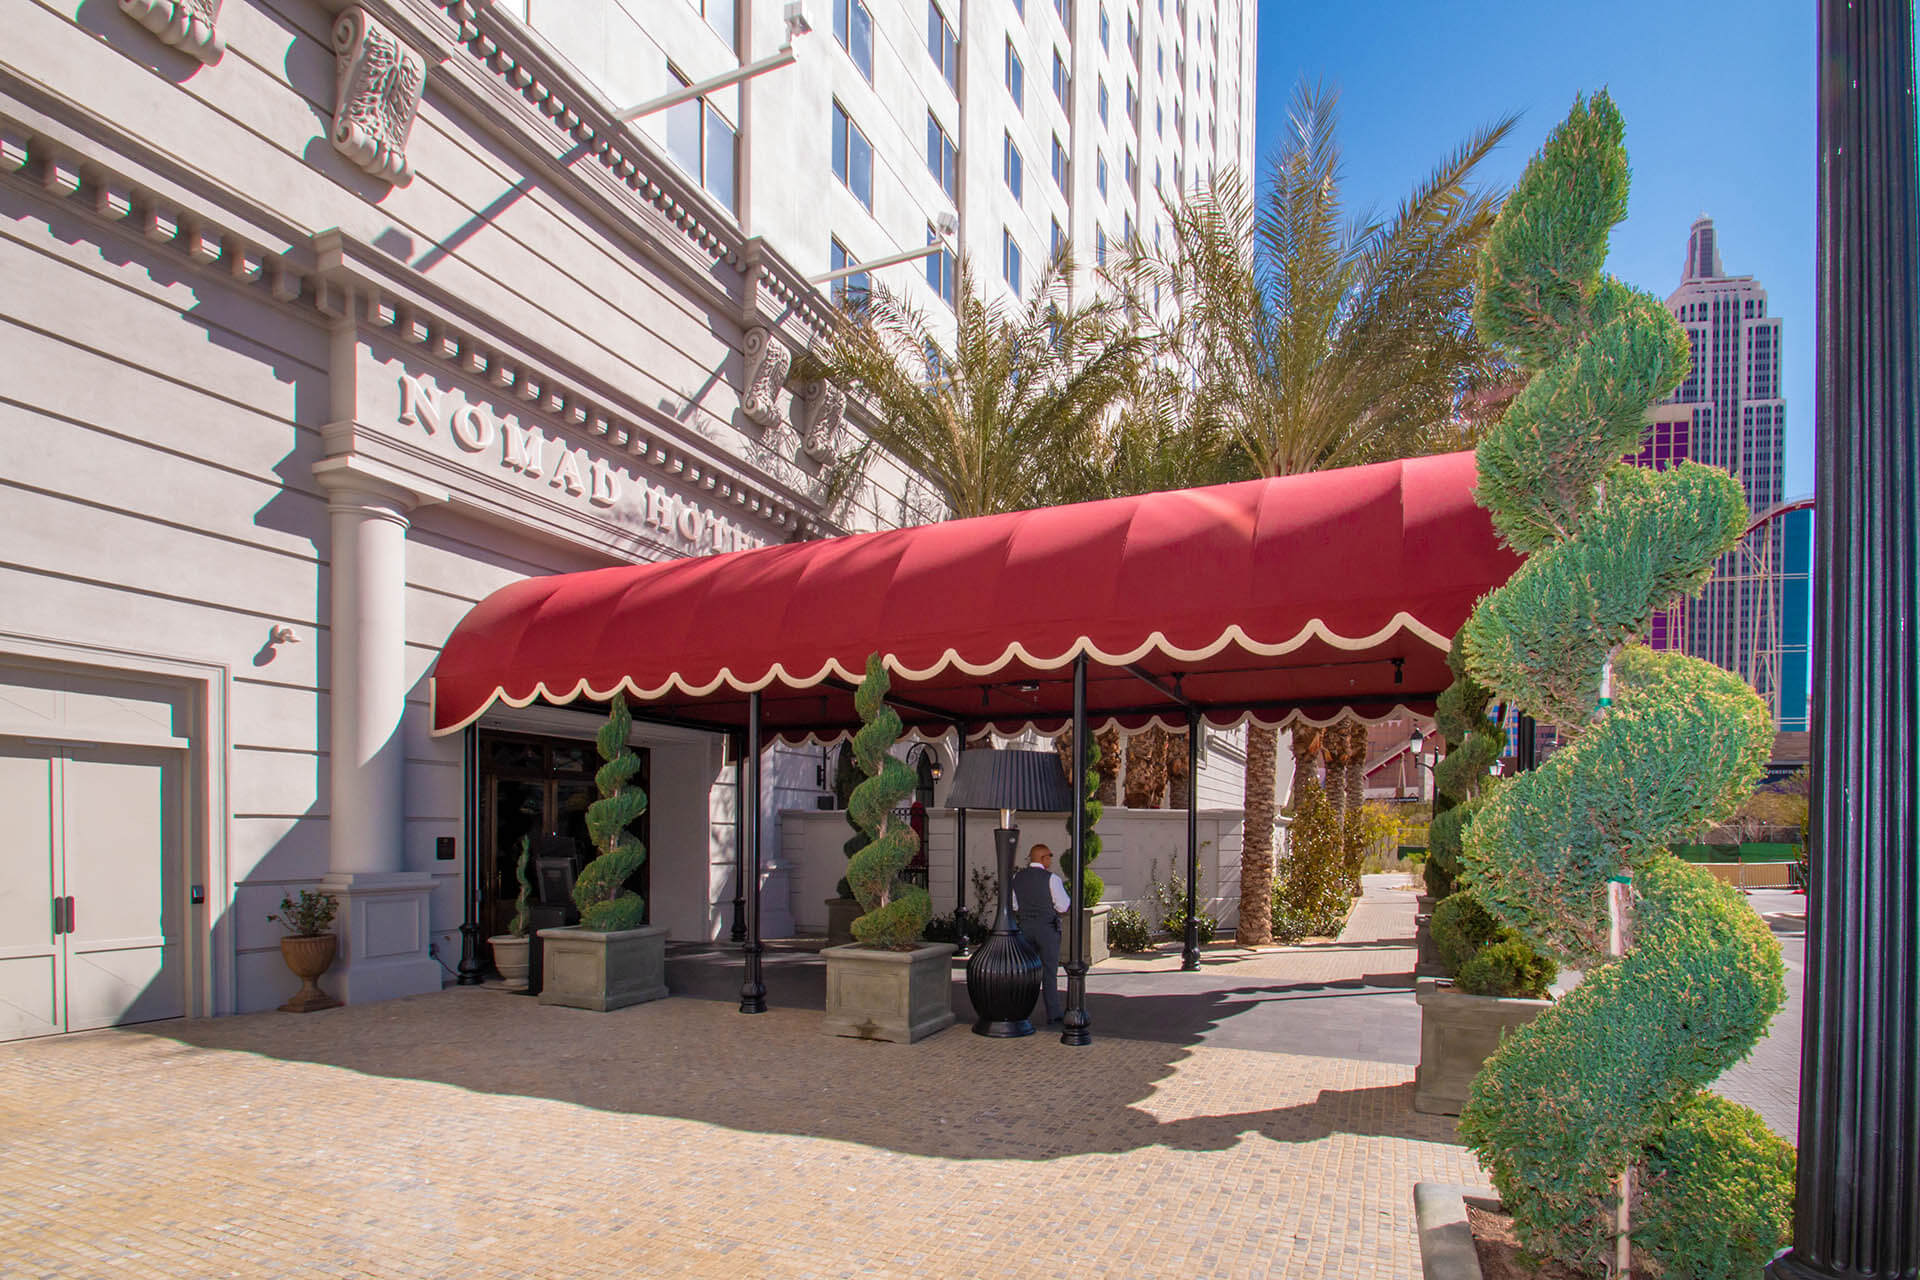 NoMad Hotel Custom Entryway Canopy Fabricated by Metro Awnings of Las Vegas, Nevada